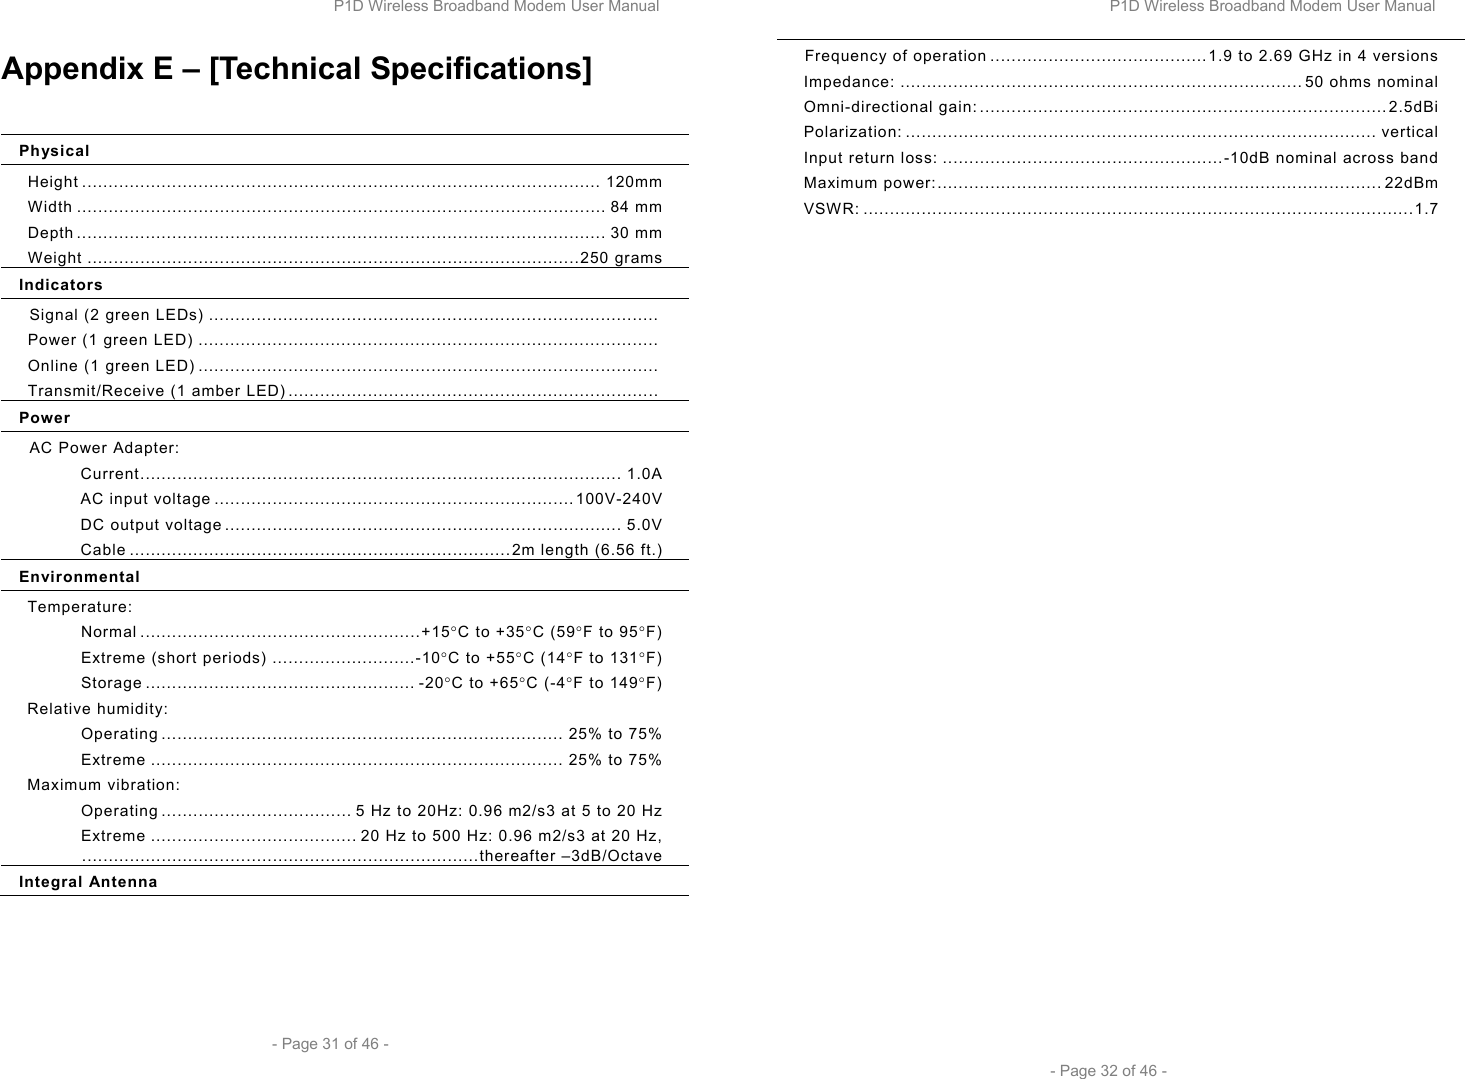 P1D Wireless Broadband Modem User Manual  - Page 31 of 46 -  Appendix E – [Technical Specifications]  Physical Height .................................................................................................. 120mm Width .................................................................................................... 84 mm  Depth .................................................................................................... 30 mm Weight .............................................................................................250 grams Indicators Signal (2 green LEDs) .....................................................................................  Power (1 green LED) .......................................................................................  Online (1 green LED) .......................................................................................  Transmit/Receive (1 amber LED) ......................................................................  Power AC Power Adapter: Current........................................................................................... 1.0A AC input voltage ....................................................................100V-240V DC output voltage ........................................................................... 5.0V Cable ........................................................................2m length (6.56 ft.) Environmental Temperature: Normal .....................................................+15°C to +35°C (59°F to 95°F) Extreme (short periods) ...........................-10°C to +55°C (14°F to 131°F) Storage ................................................... -20°C to +65°C (-4°F to 149°F) Relative humidity: Operating ............................................................................ 25% to 75% Extreme .............................................................................. 25% to 75% Maximum vibration: Operating .................................... 5 Hz to 20Hz: 0.96 m2/s3 at 5 to 20 Hz Extreme ....................................... 20 Hz to 500 Hz: 0.96 m2/s3 at 20 Hz,  ...........................................................................thereafter –3dB/Octave Integral Antenna P1D Wireless Broadband Modem User Manual  - Page 32 of 46 - Frequency of operation .........................................1.9 to 2.69 GHz in 4 versions Impedance: ............................................................................ 50 ohms nominal Omni-directional gain: .............................................................................2.5dBi Polarization: ......................................................................................... vertical Input return loss: .....................................................-10dB nominal across band Maximum power:.................................................................................... 22dBm VSWR: ........................................................................................................1.7 